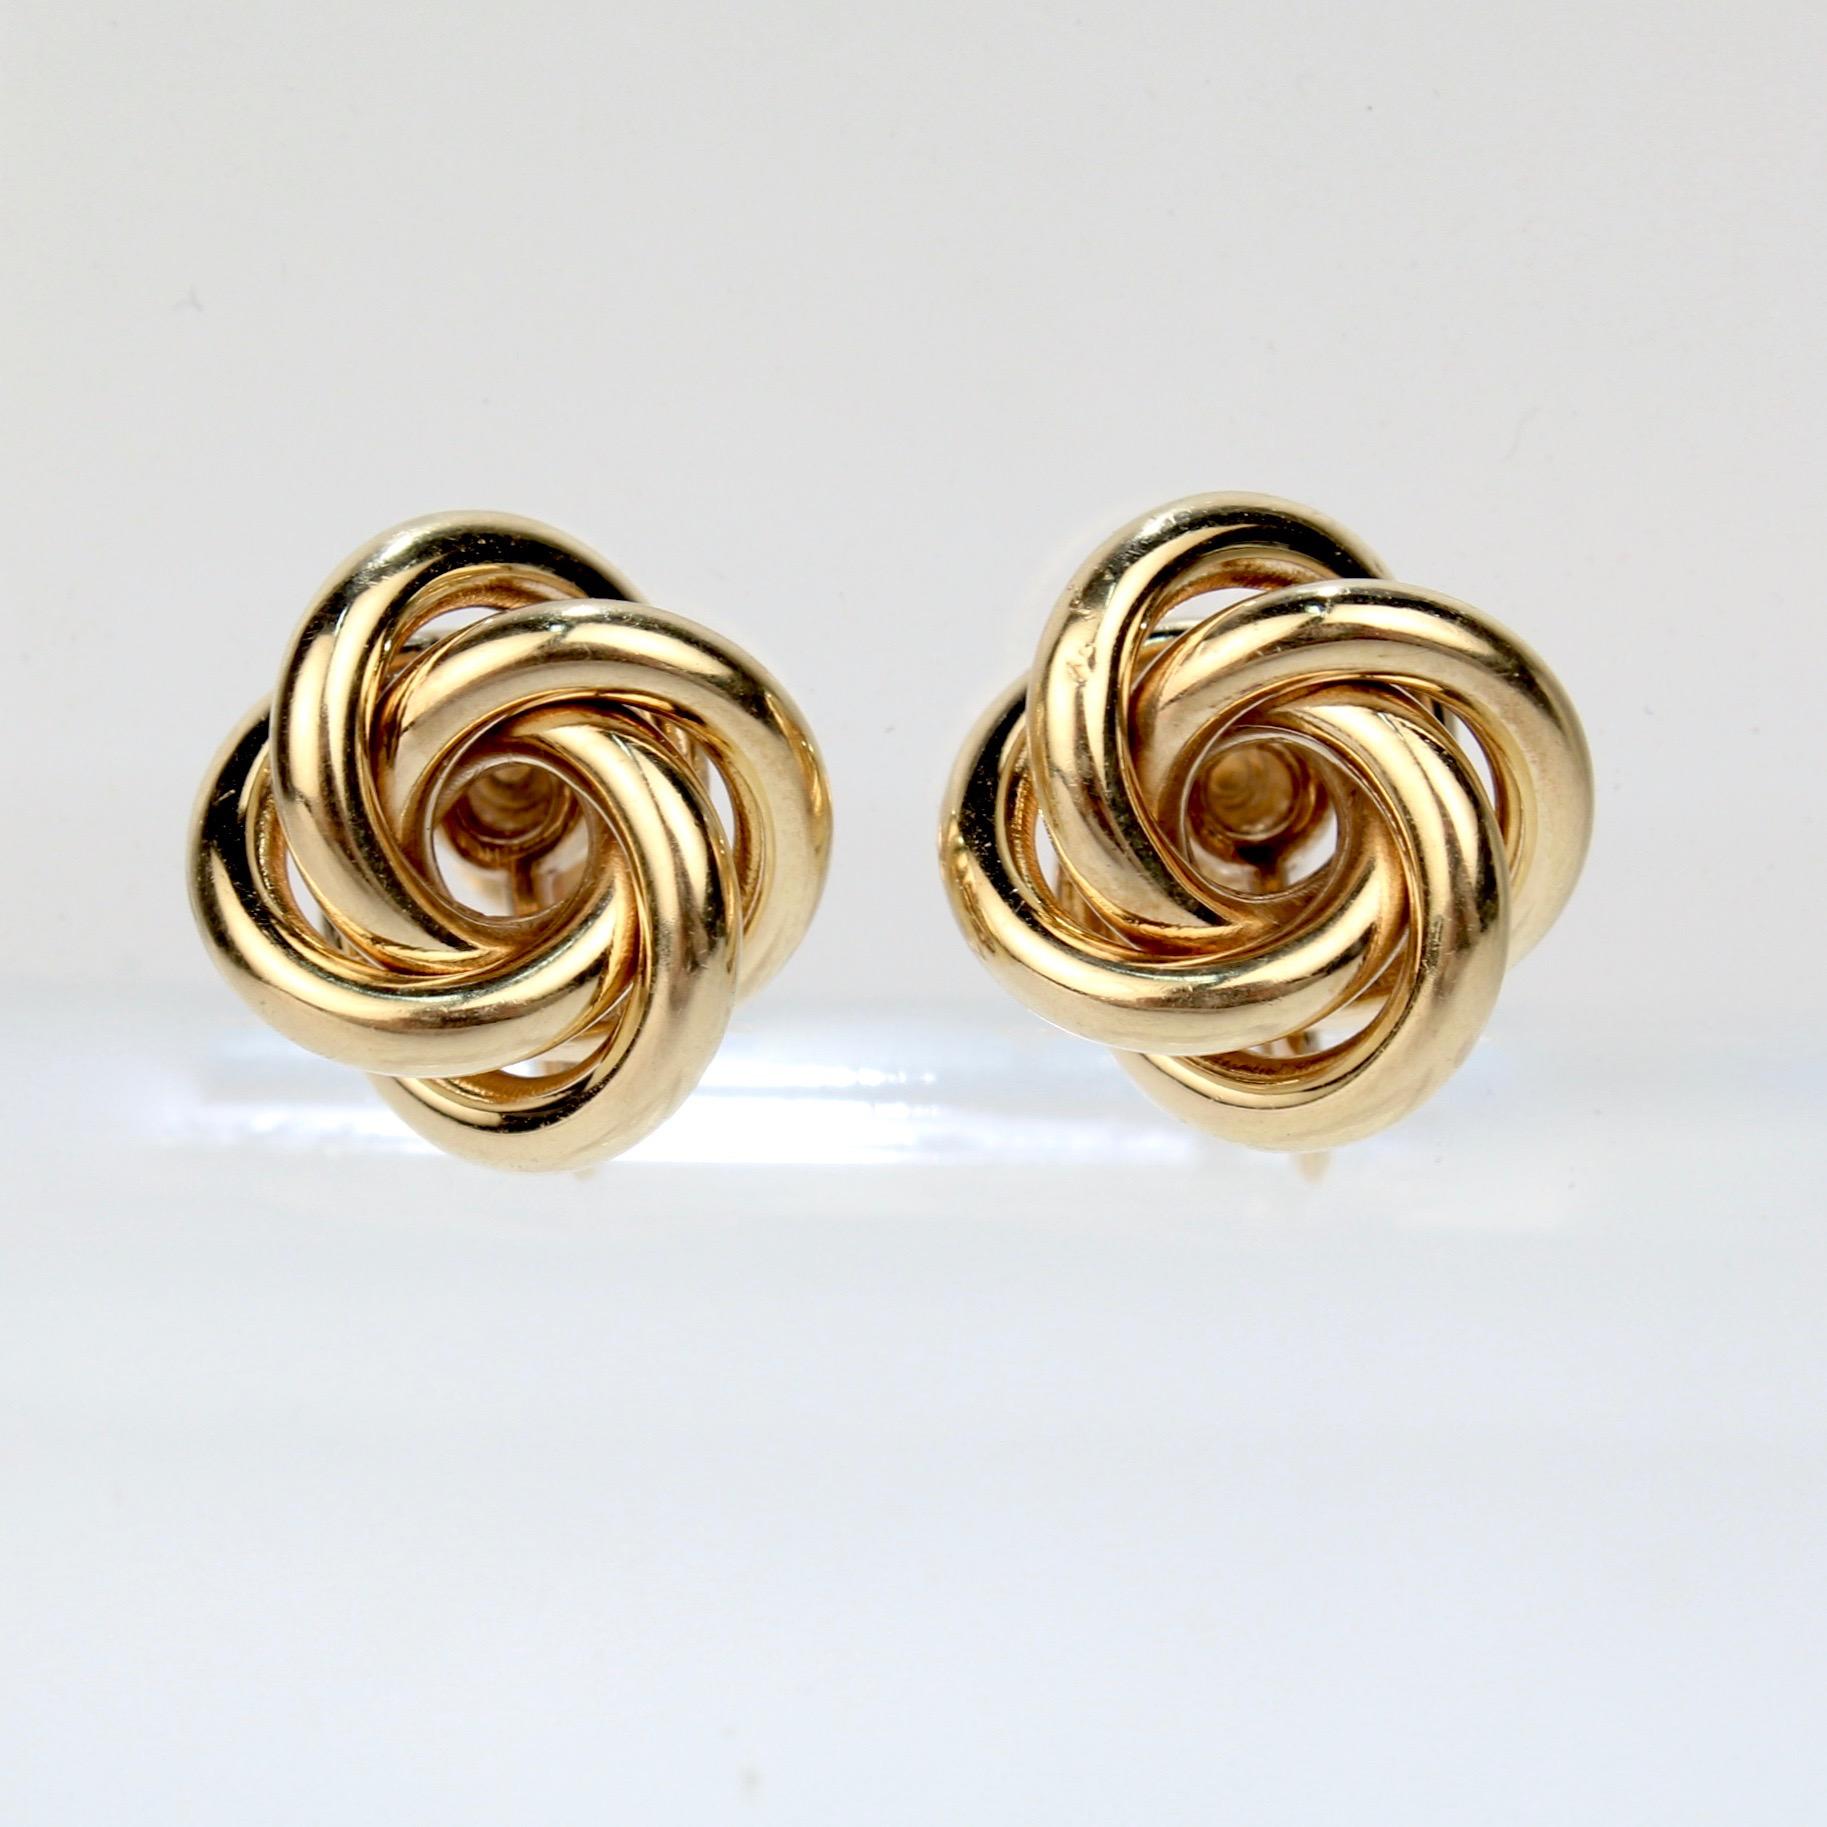 A fine pair of Tiffany & Co. Love Knot earrings.

Each in 14k gold with screw back posts.

Marked 14k and Tiffany & Co. to the reverse.

Diameter: ca. 15 mm

Items purchased from this dealer must delight you. Purchases may be returned for any reason